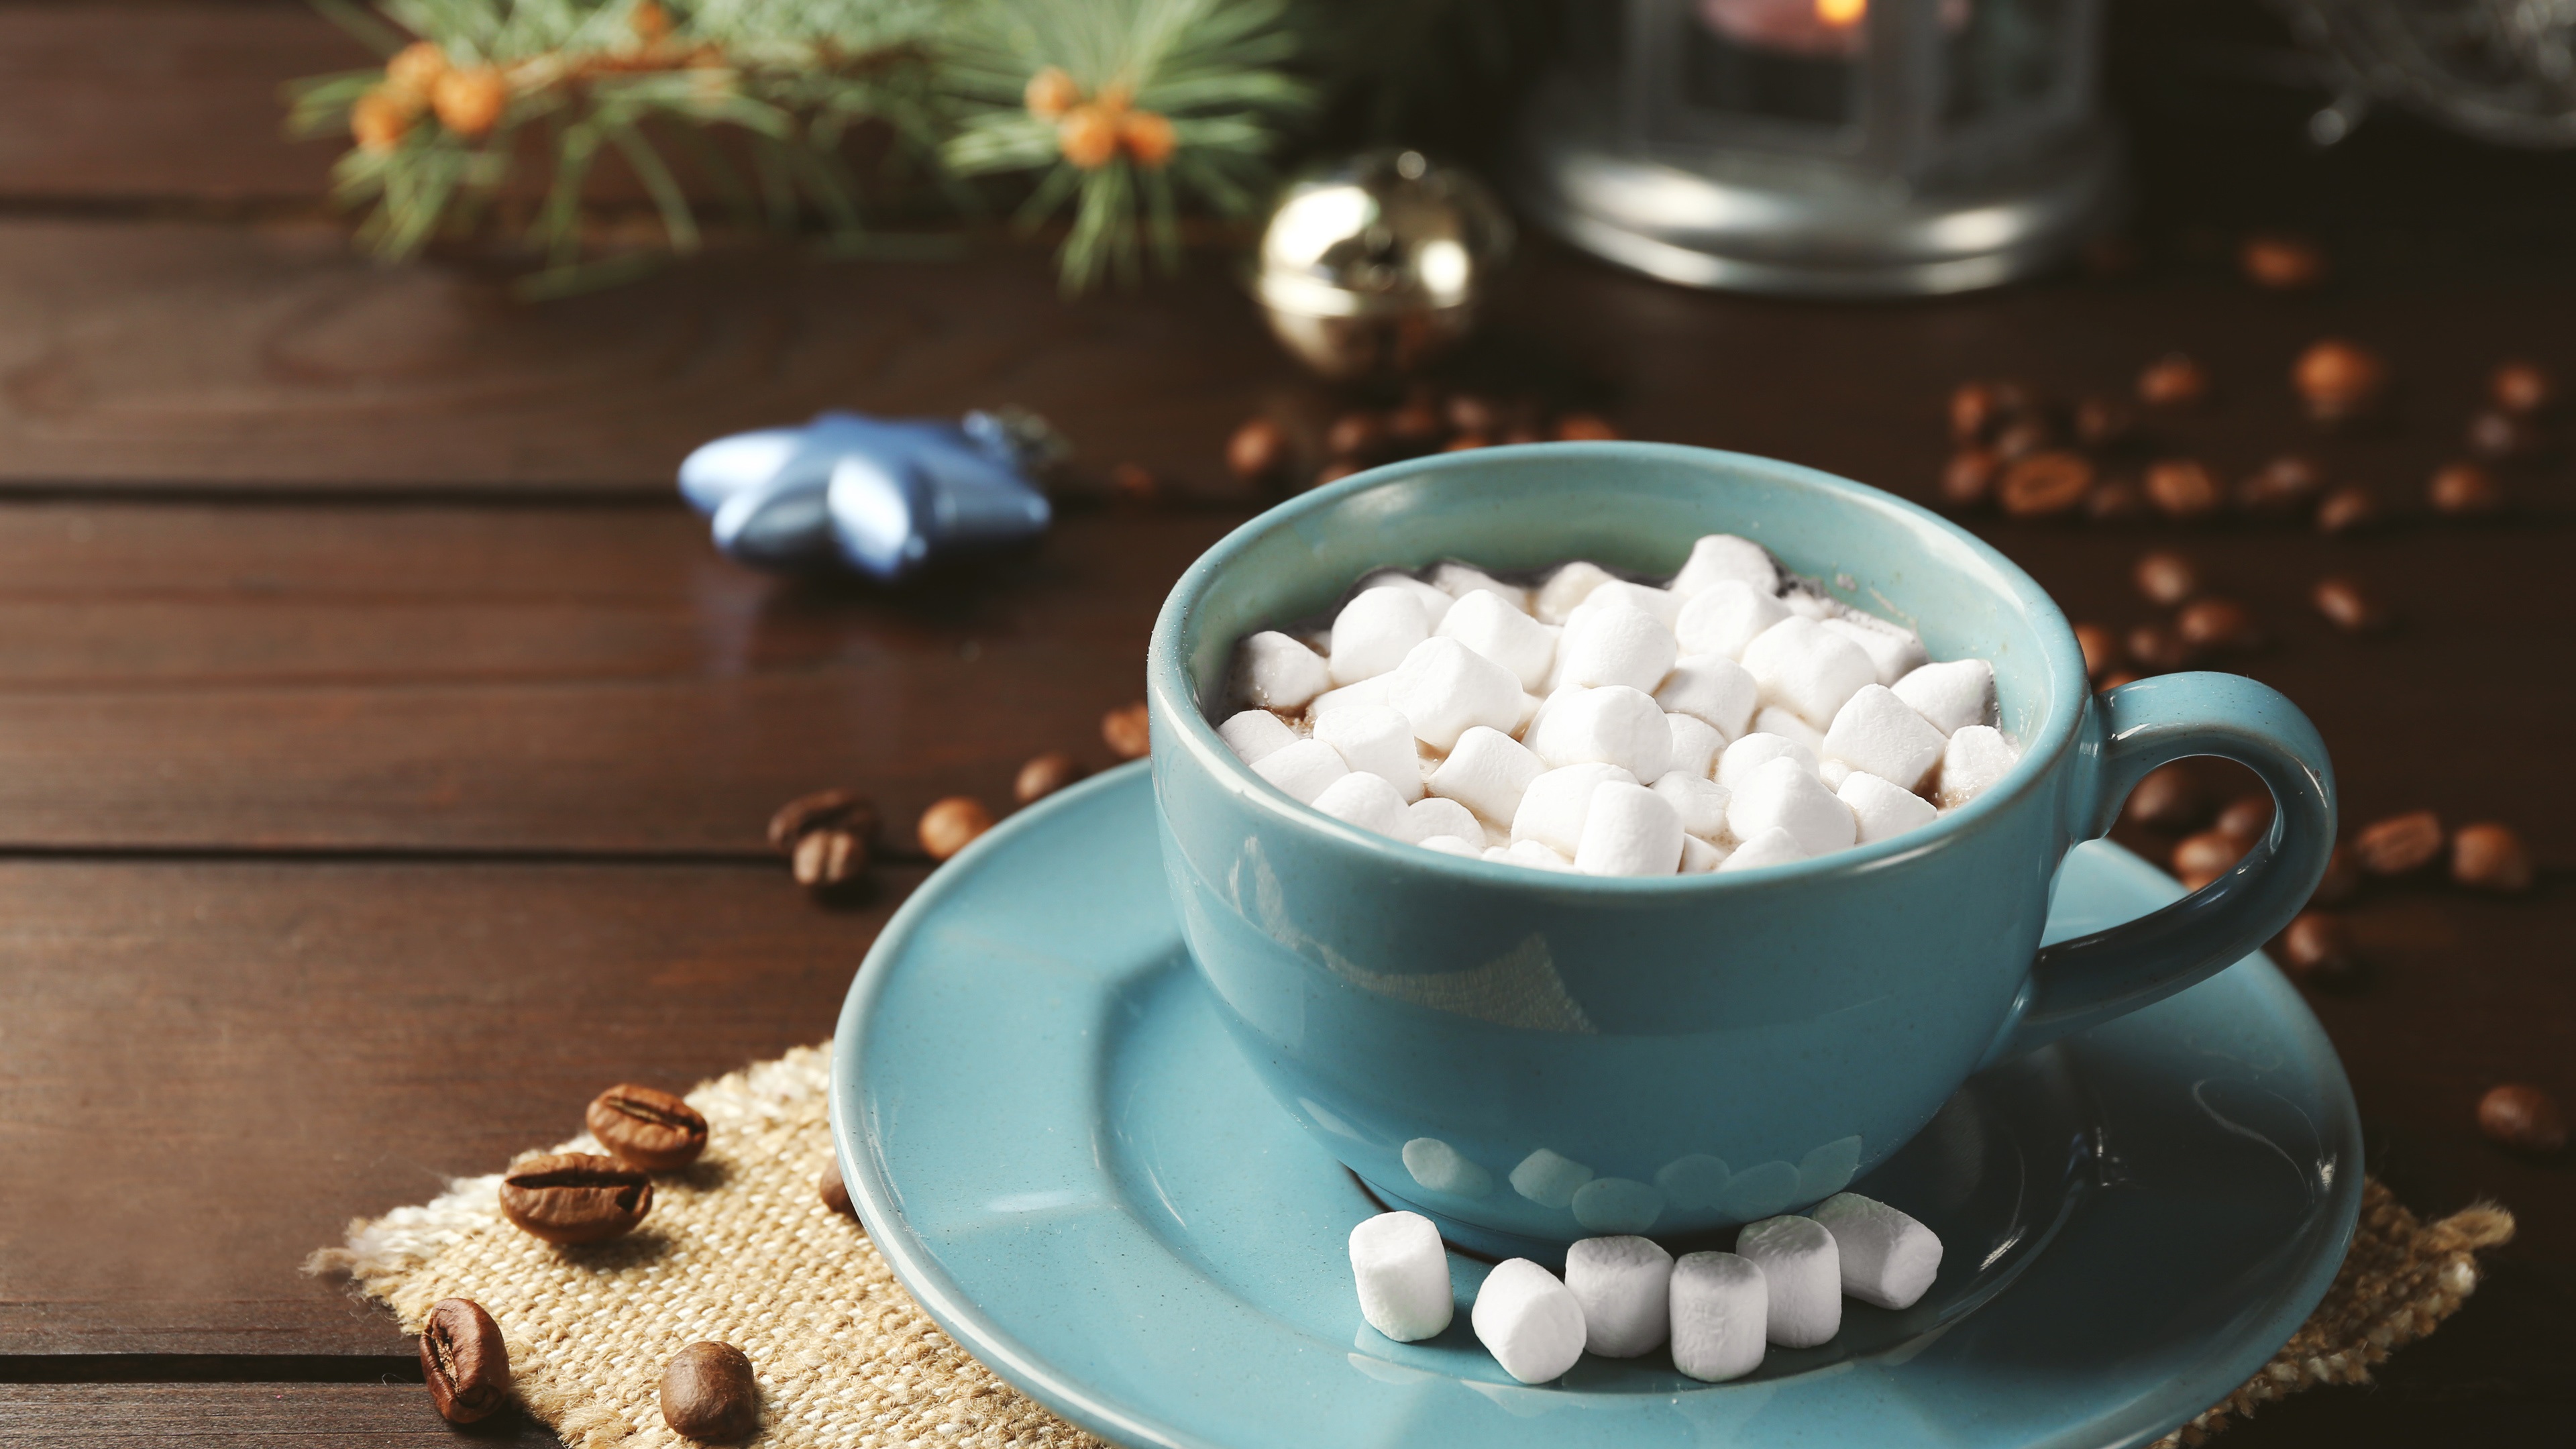 Wallpaper Hot Chocolate, Cocoa, Marshmallow, Cup, Drinks - Hot Chocolate With Marshmallows - HD Wallpaper 